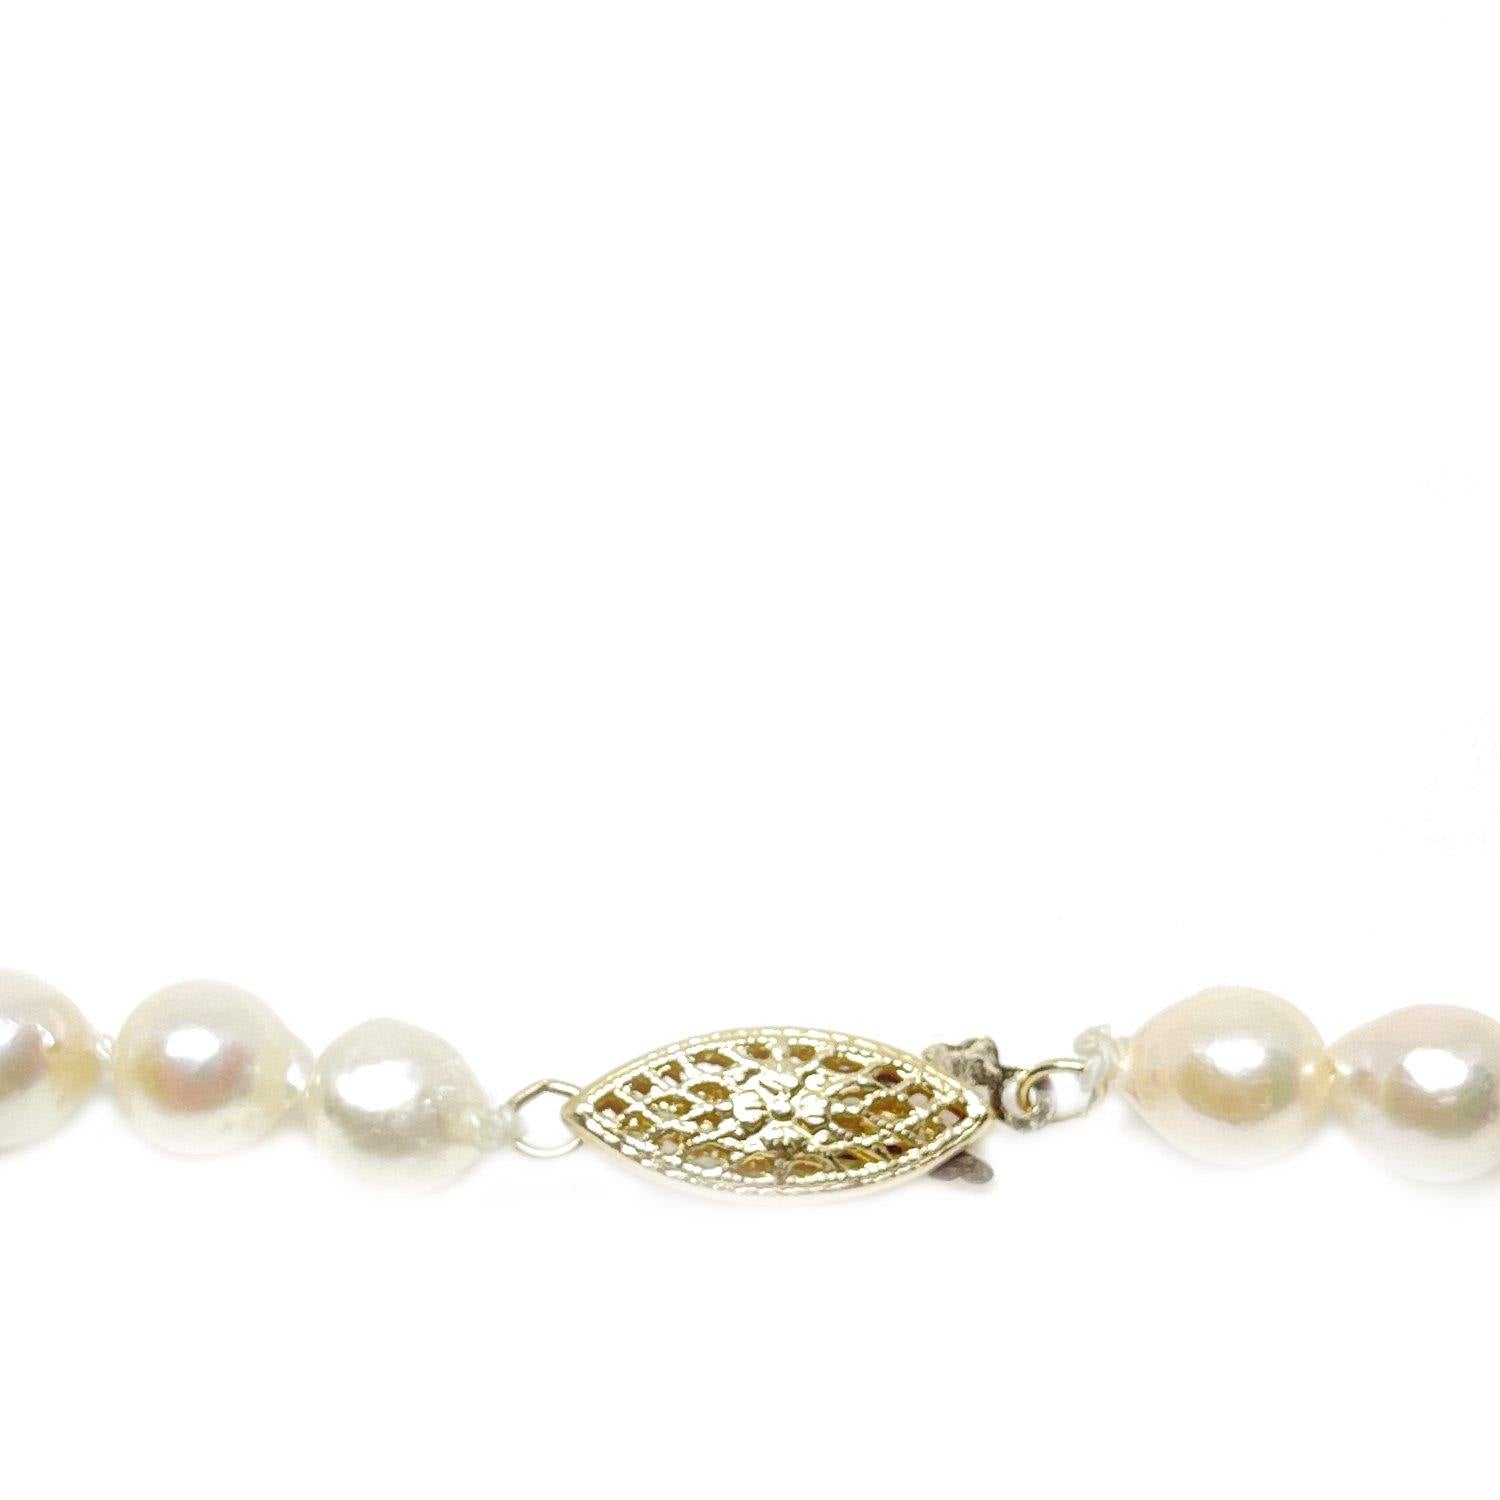 Baroque Japanese Cultured Akoya Pearl Strand - 14K Yellow Gold 34 Inch